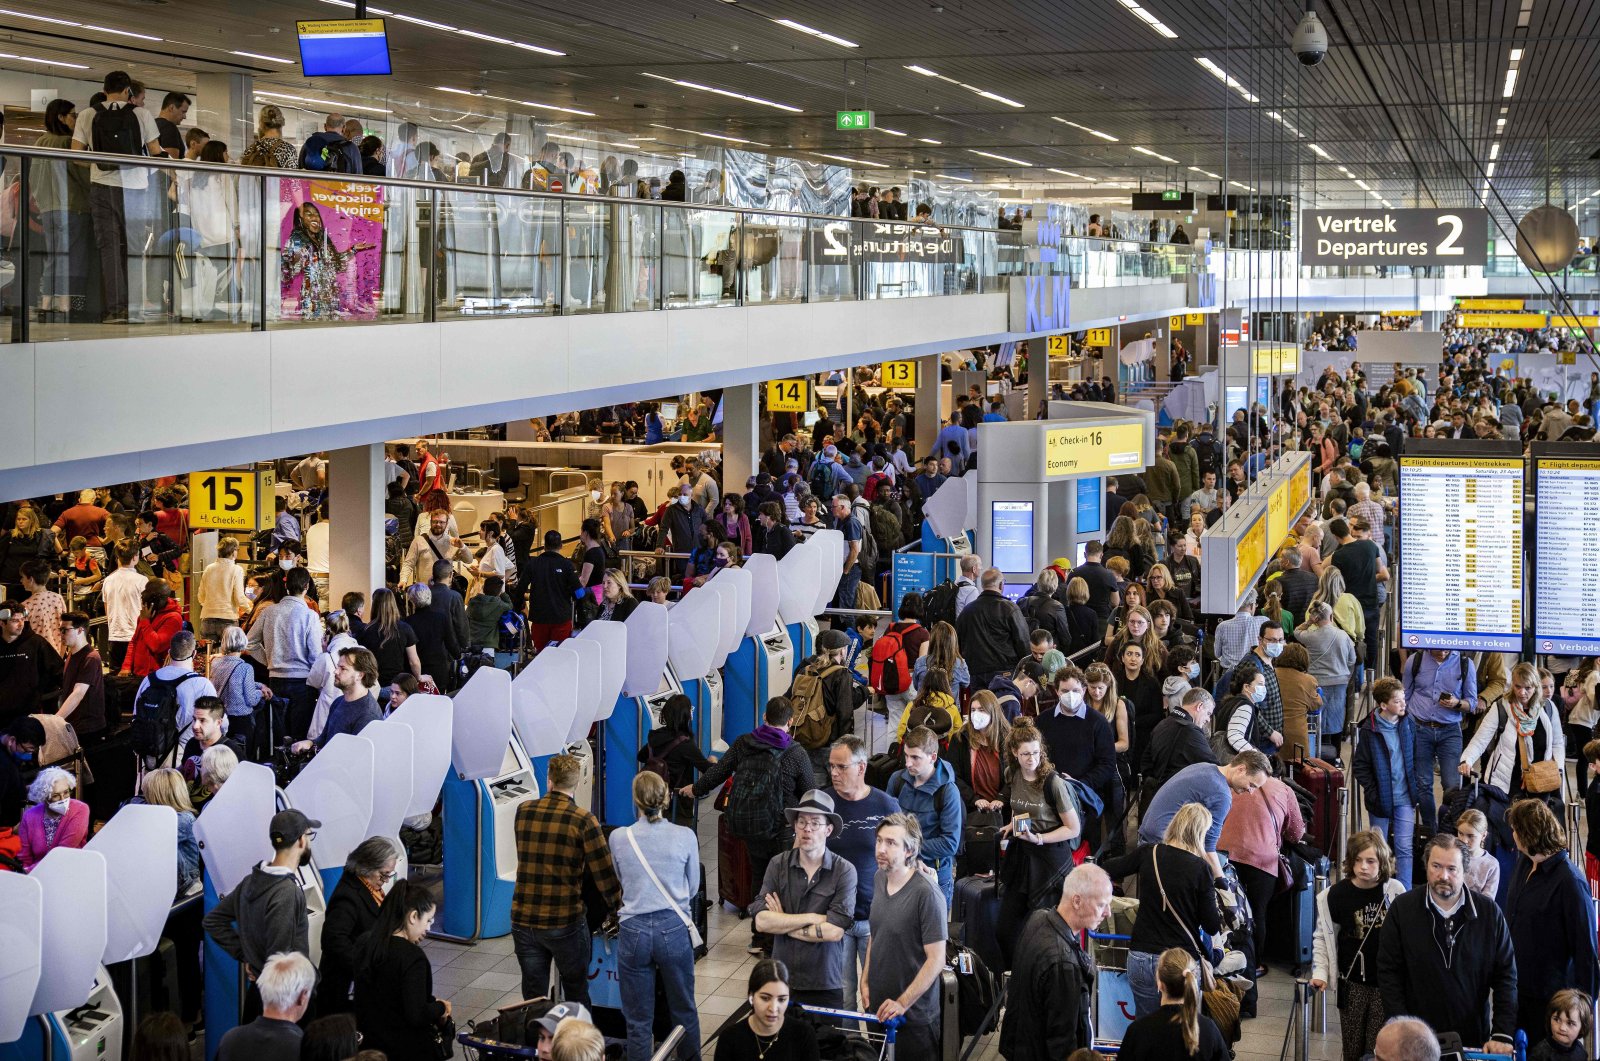 Travelers wait at the luggage claim area of Schiphol Airport, near Amsterdam during a strike of KLM personnel handling luggage, The Netherlands, April 23, 2022. (AFP Photo)